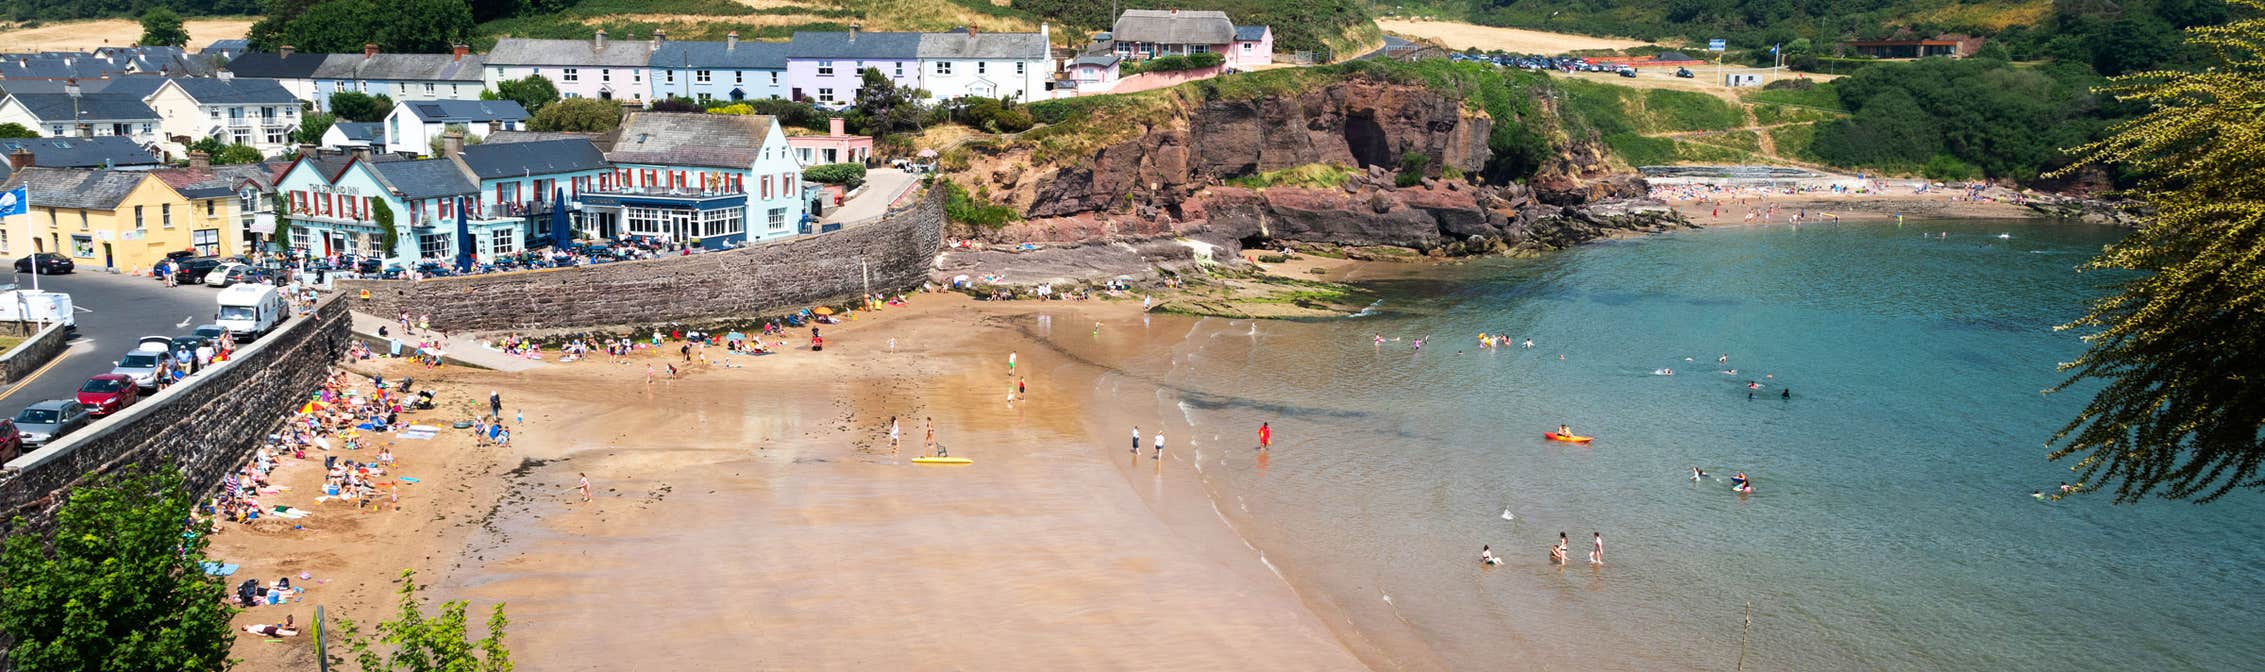 Beach at Dunmore East, County Waterford